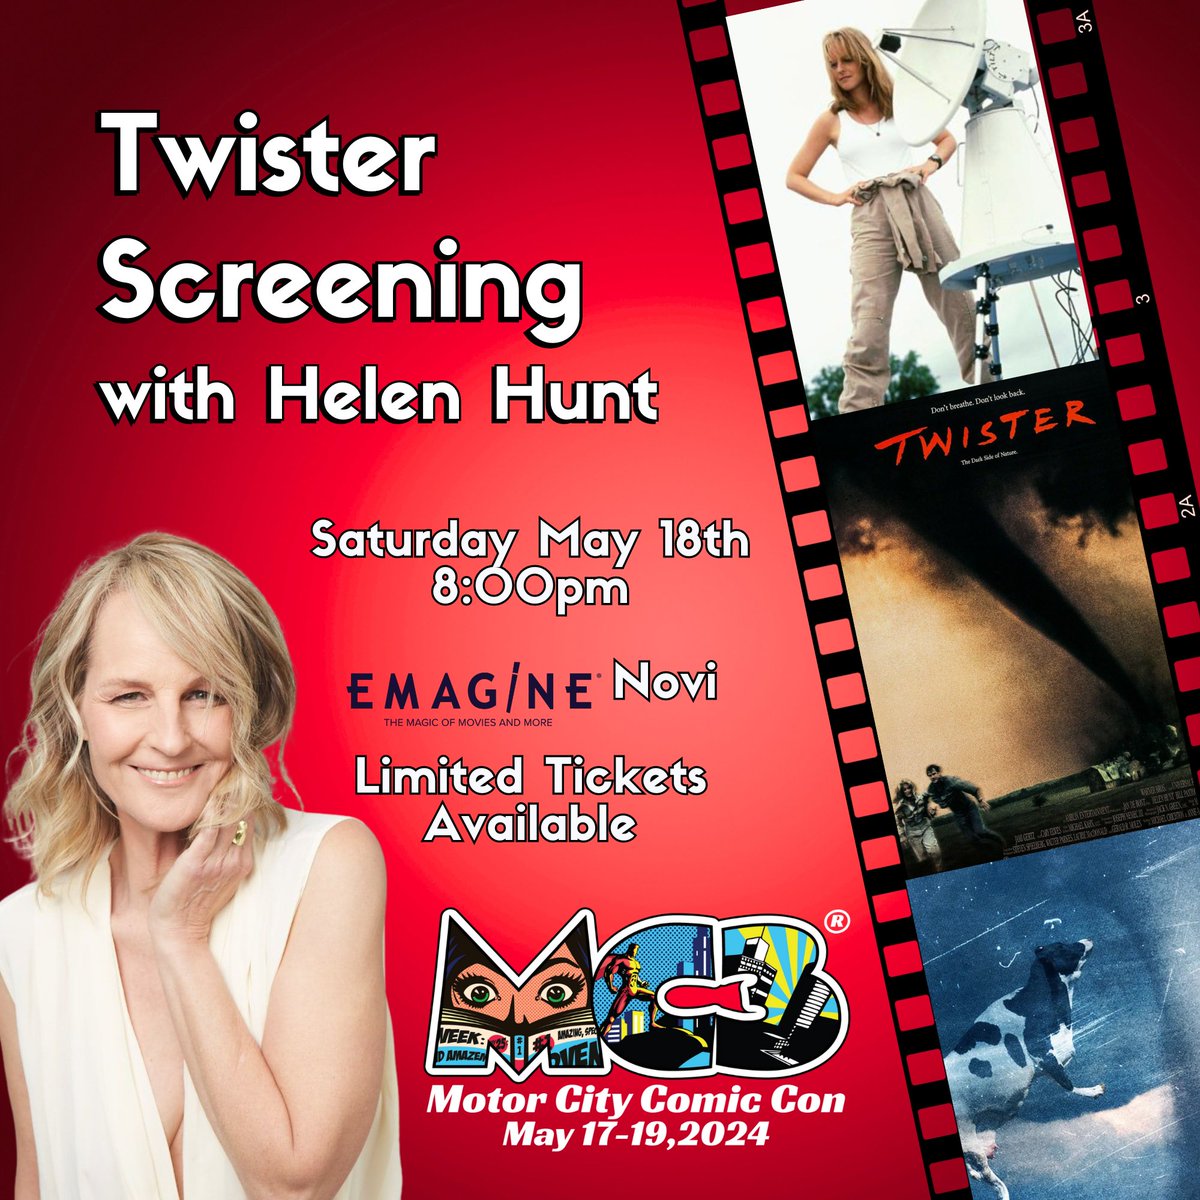 💥Due to high demand for the Twister Screening with #HelenHunt, we have reserved a larger theater at Emagine!
✅We will be adding more tickets today @ 6:30pm.
Admission to #MotorCityComicCon is not included, but is required for entry.
🎫Get your tickets @ motorcitycomiccon.com